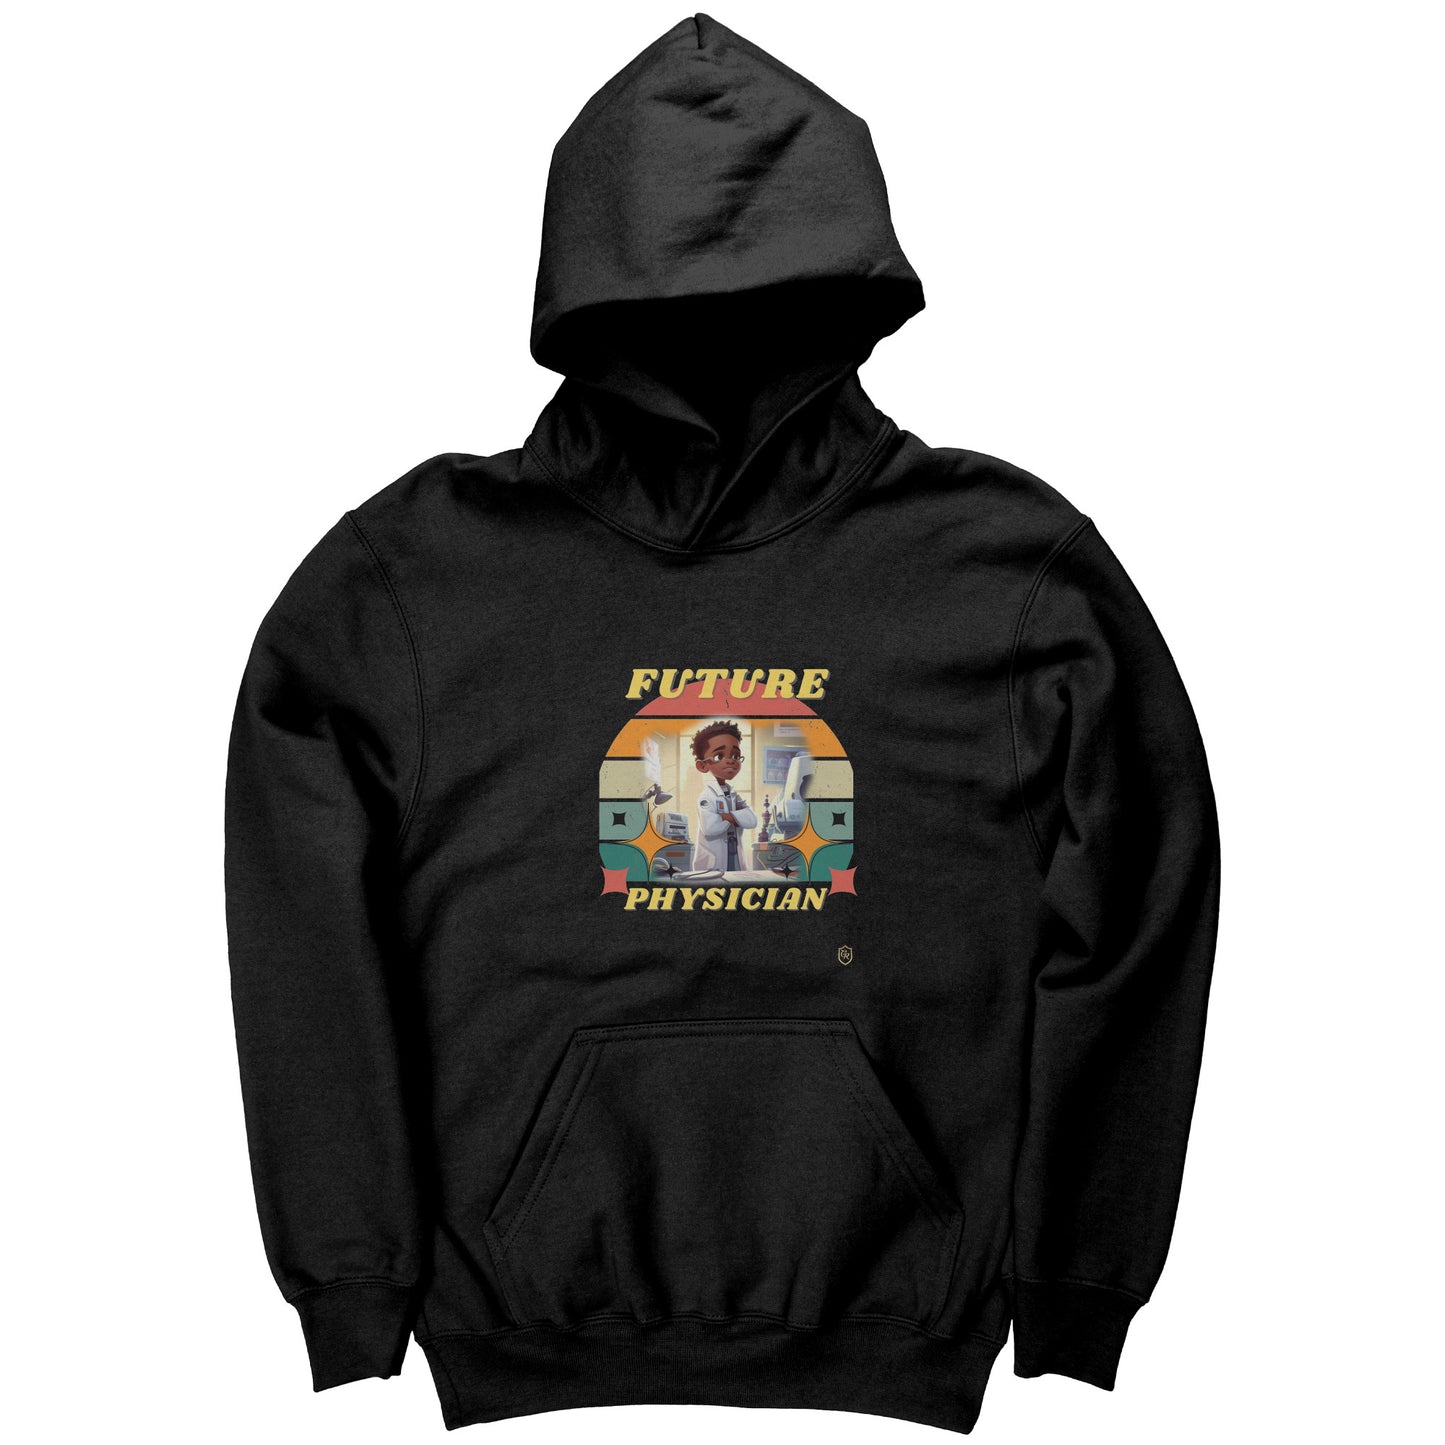 Young Boy's Future Physician Hoodie